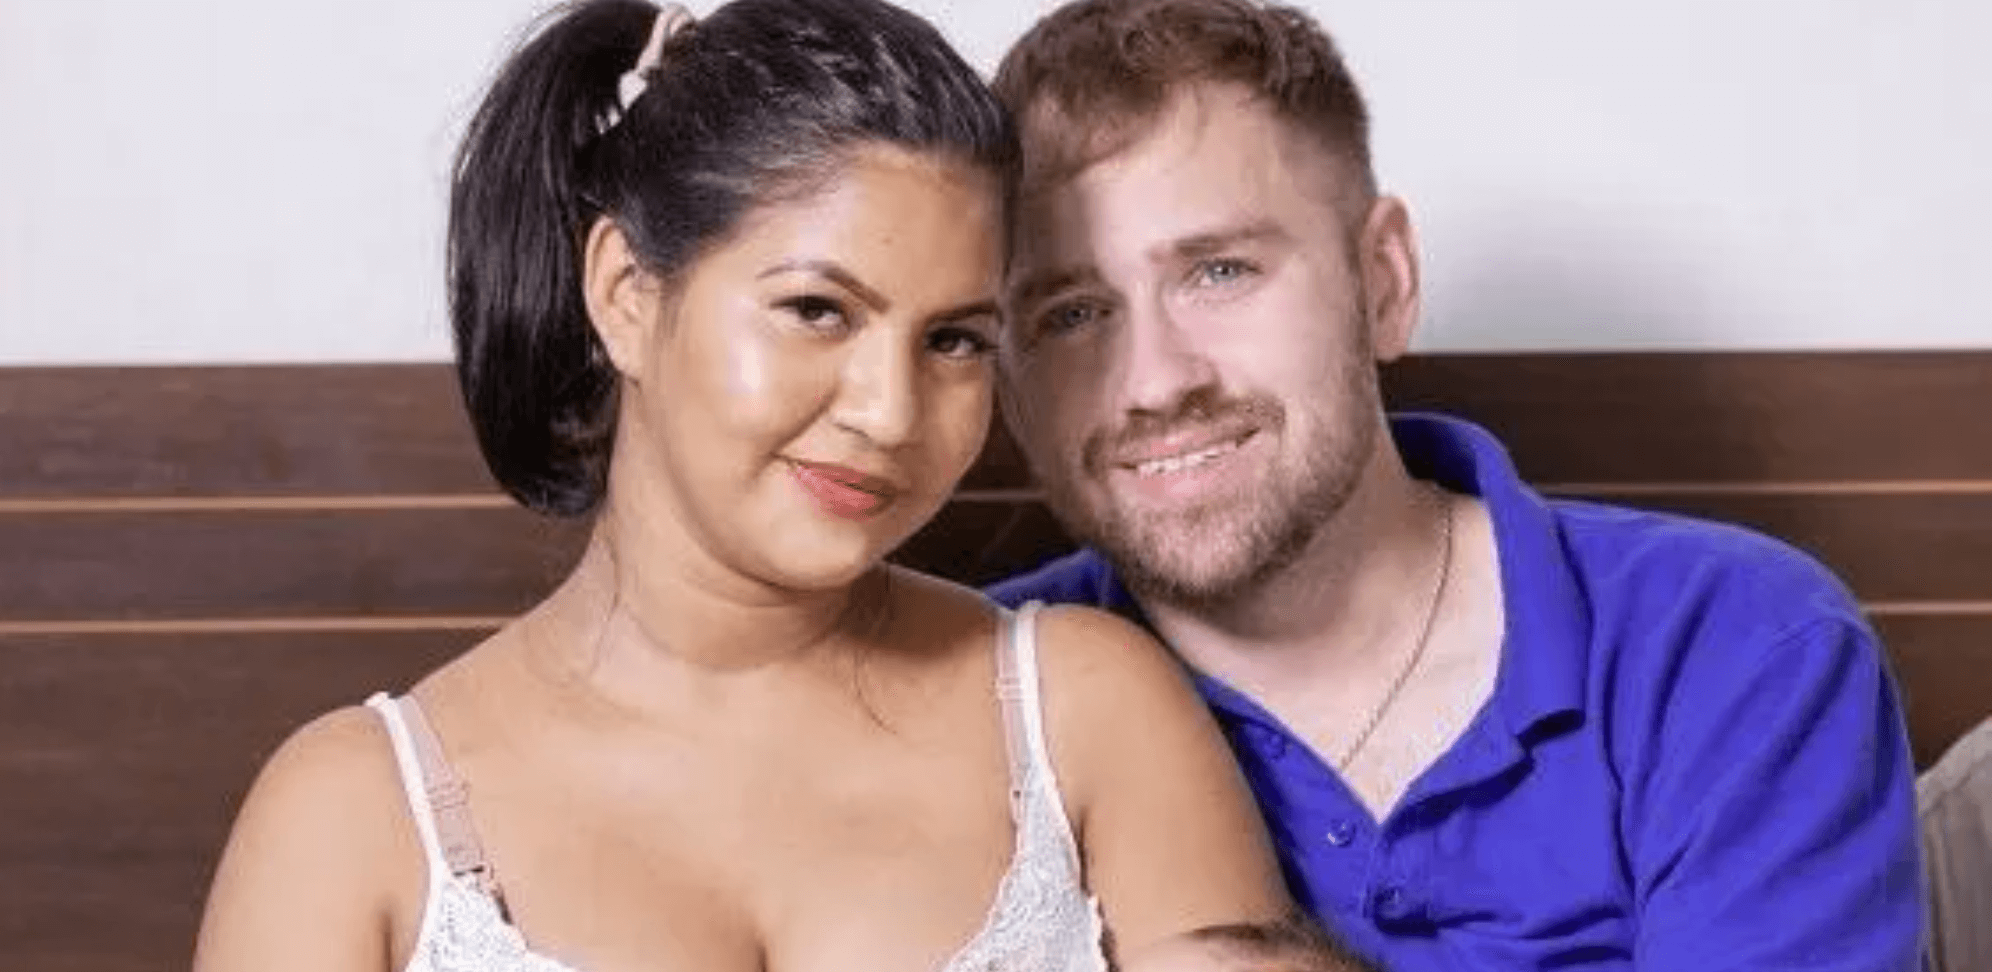 ’90 Day Fiance’ Stars Paul Staehle & Karine Martins FIRED Over Abuse Allegations!